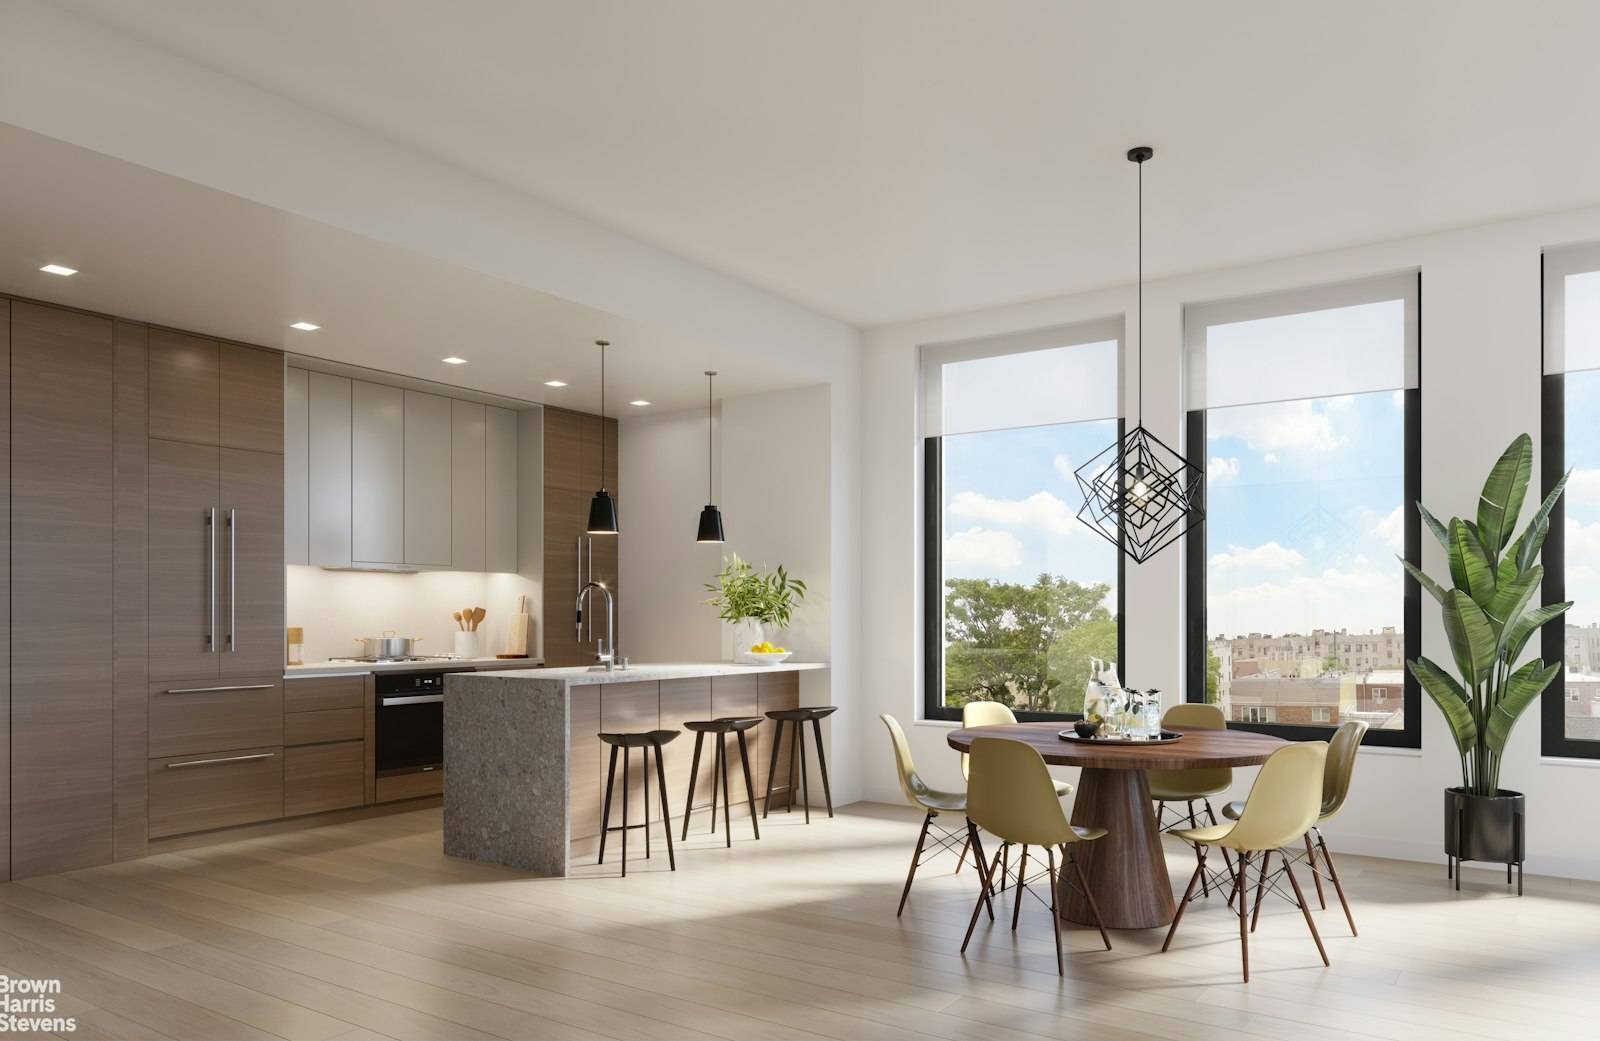 Be the first person to purchase a resale in the highly coveted luxury building, The Rowan.